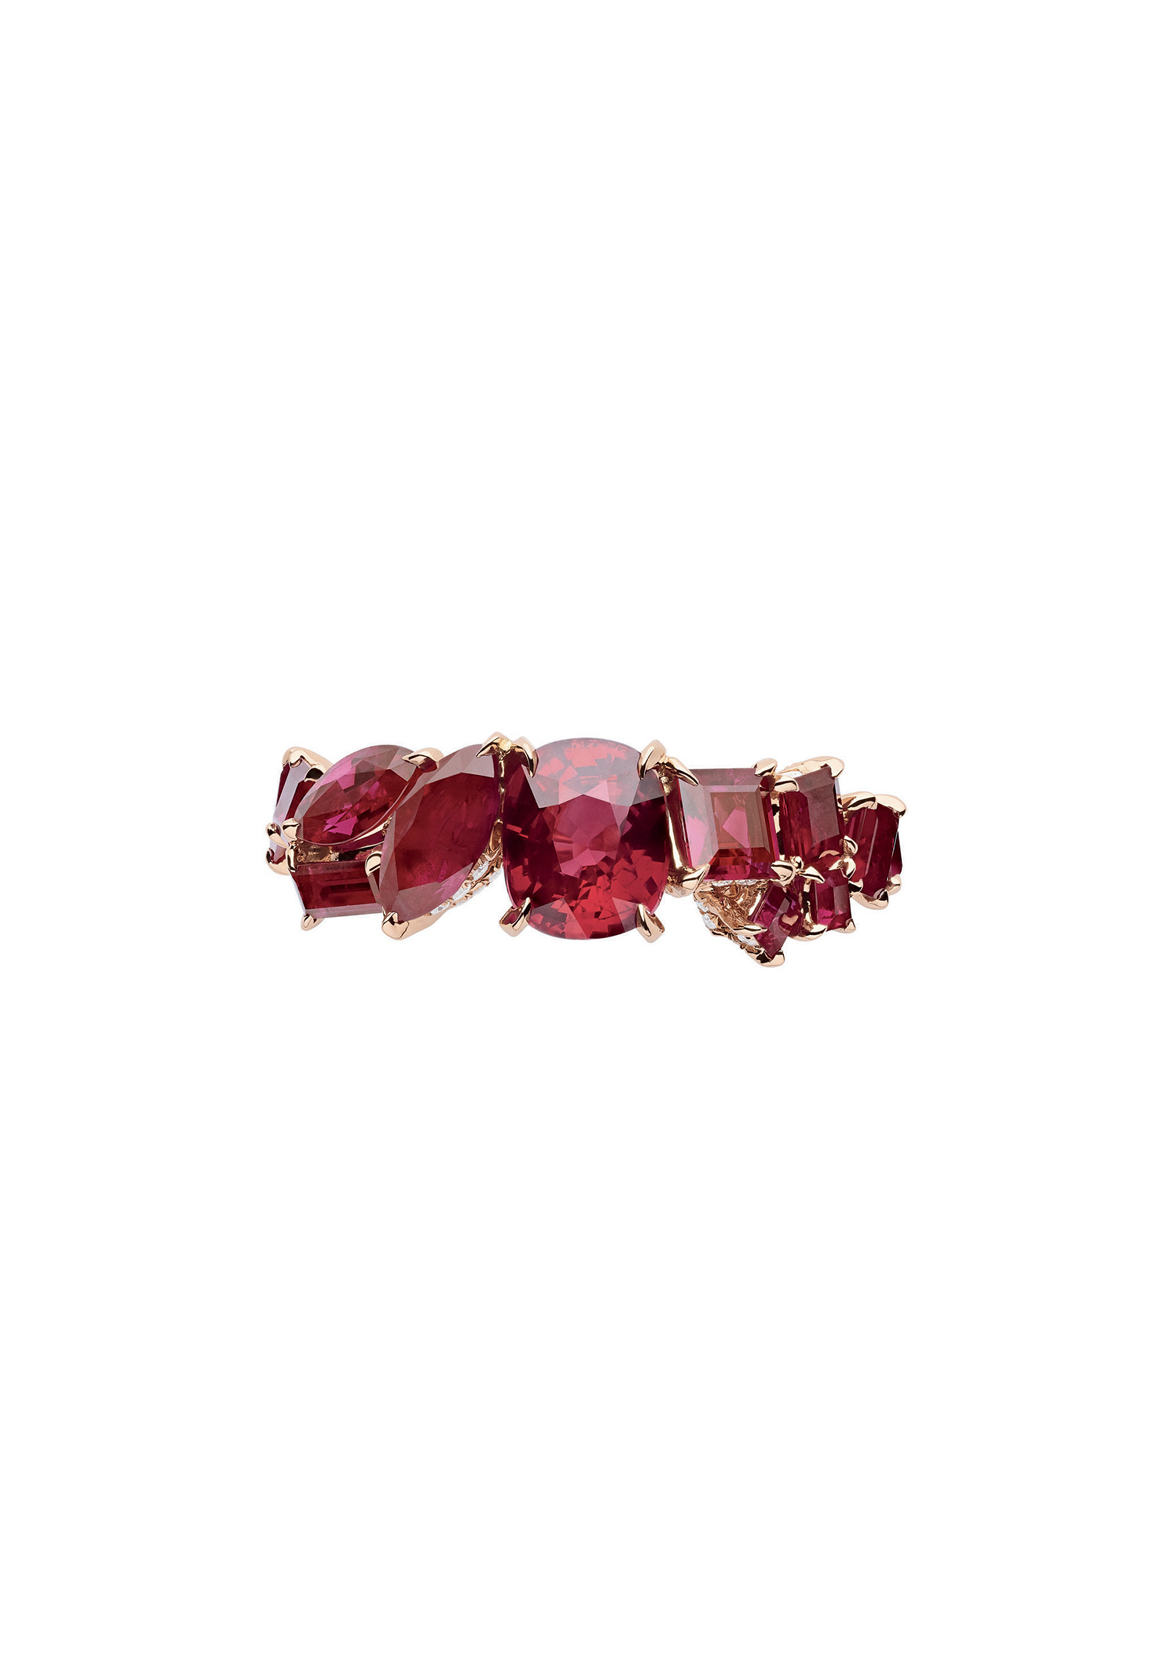 ROUGE VERMILLON RUBY RING BY DIOR